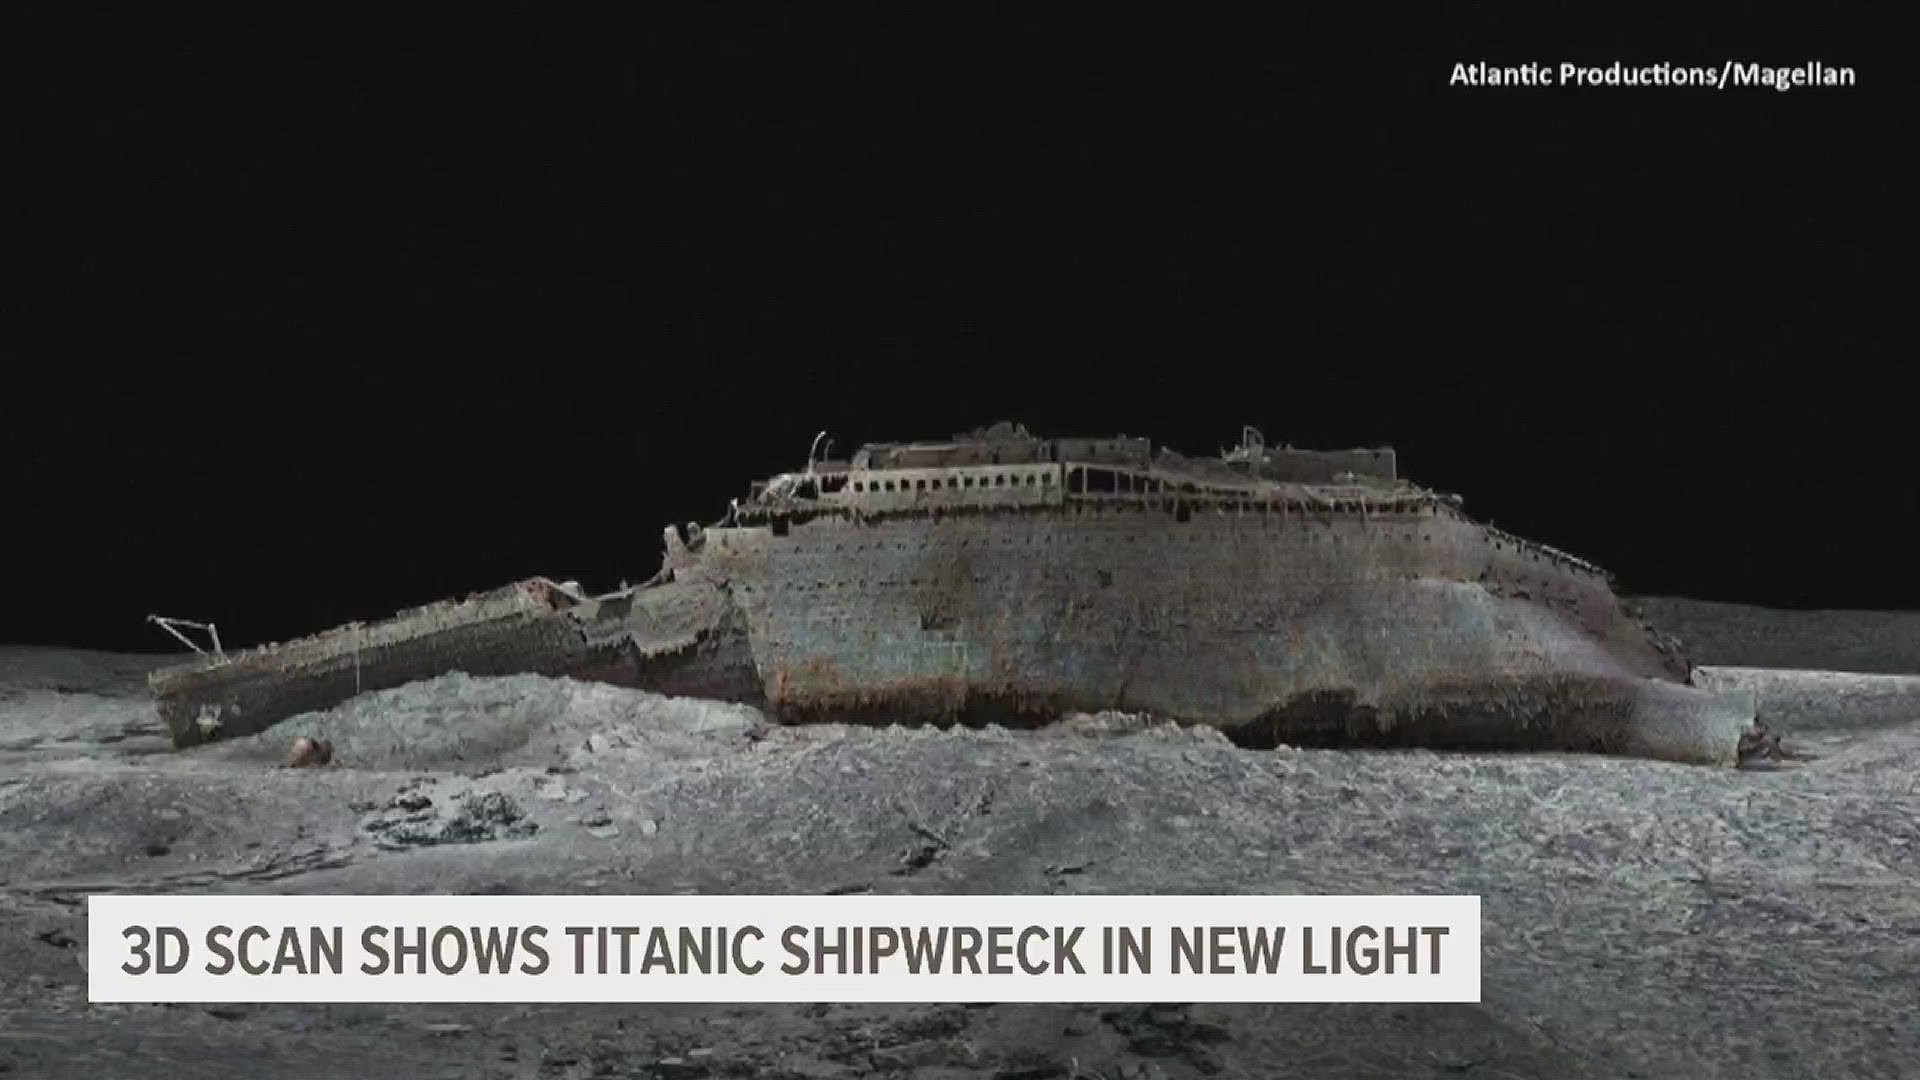 researchers spent six week in the northern Atlantic mapping the shipwreck. The team hopes to use the scan to learn more about how the sunken ship met its fate.